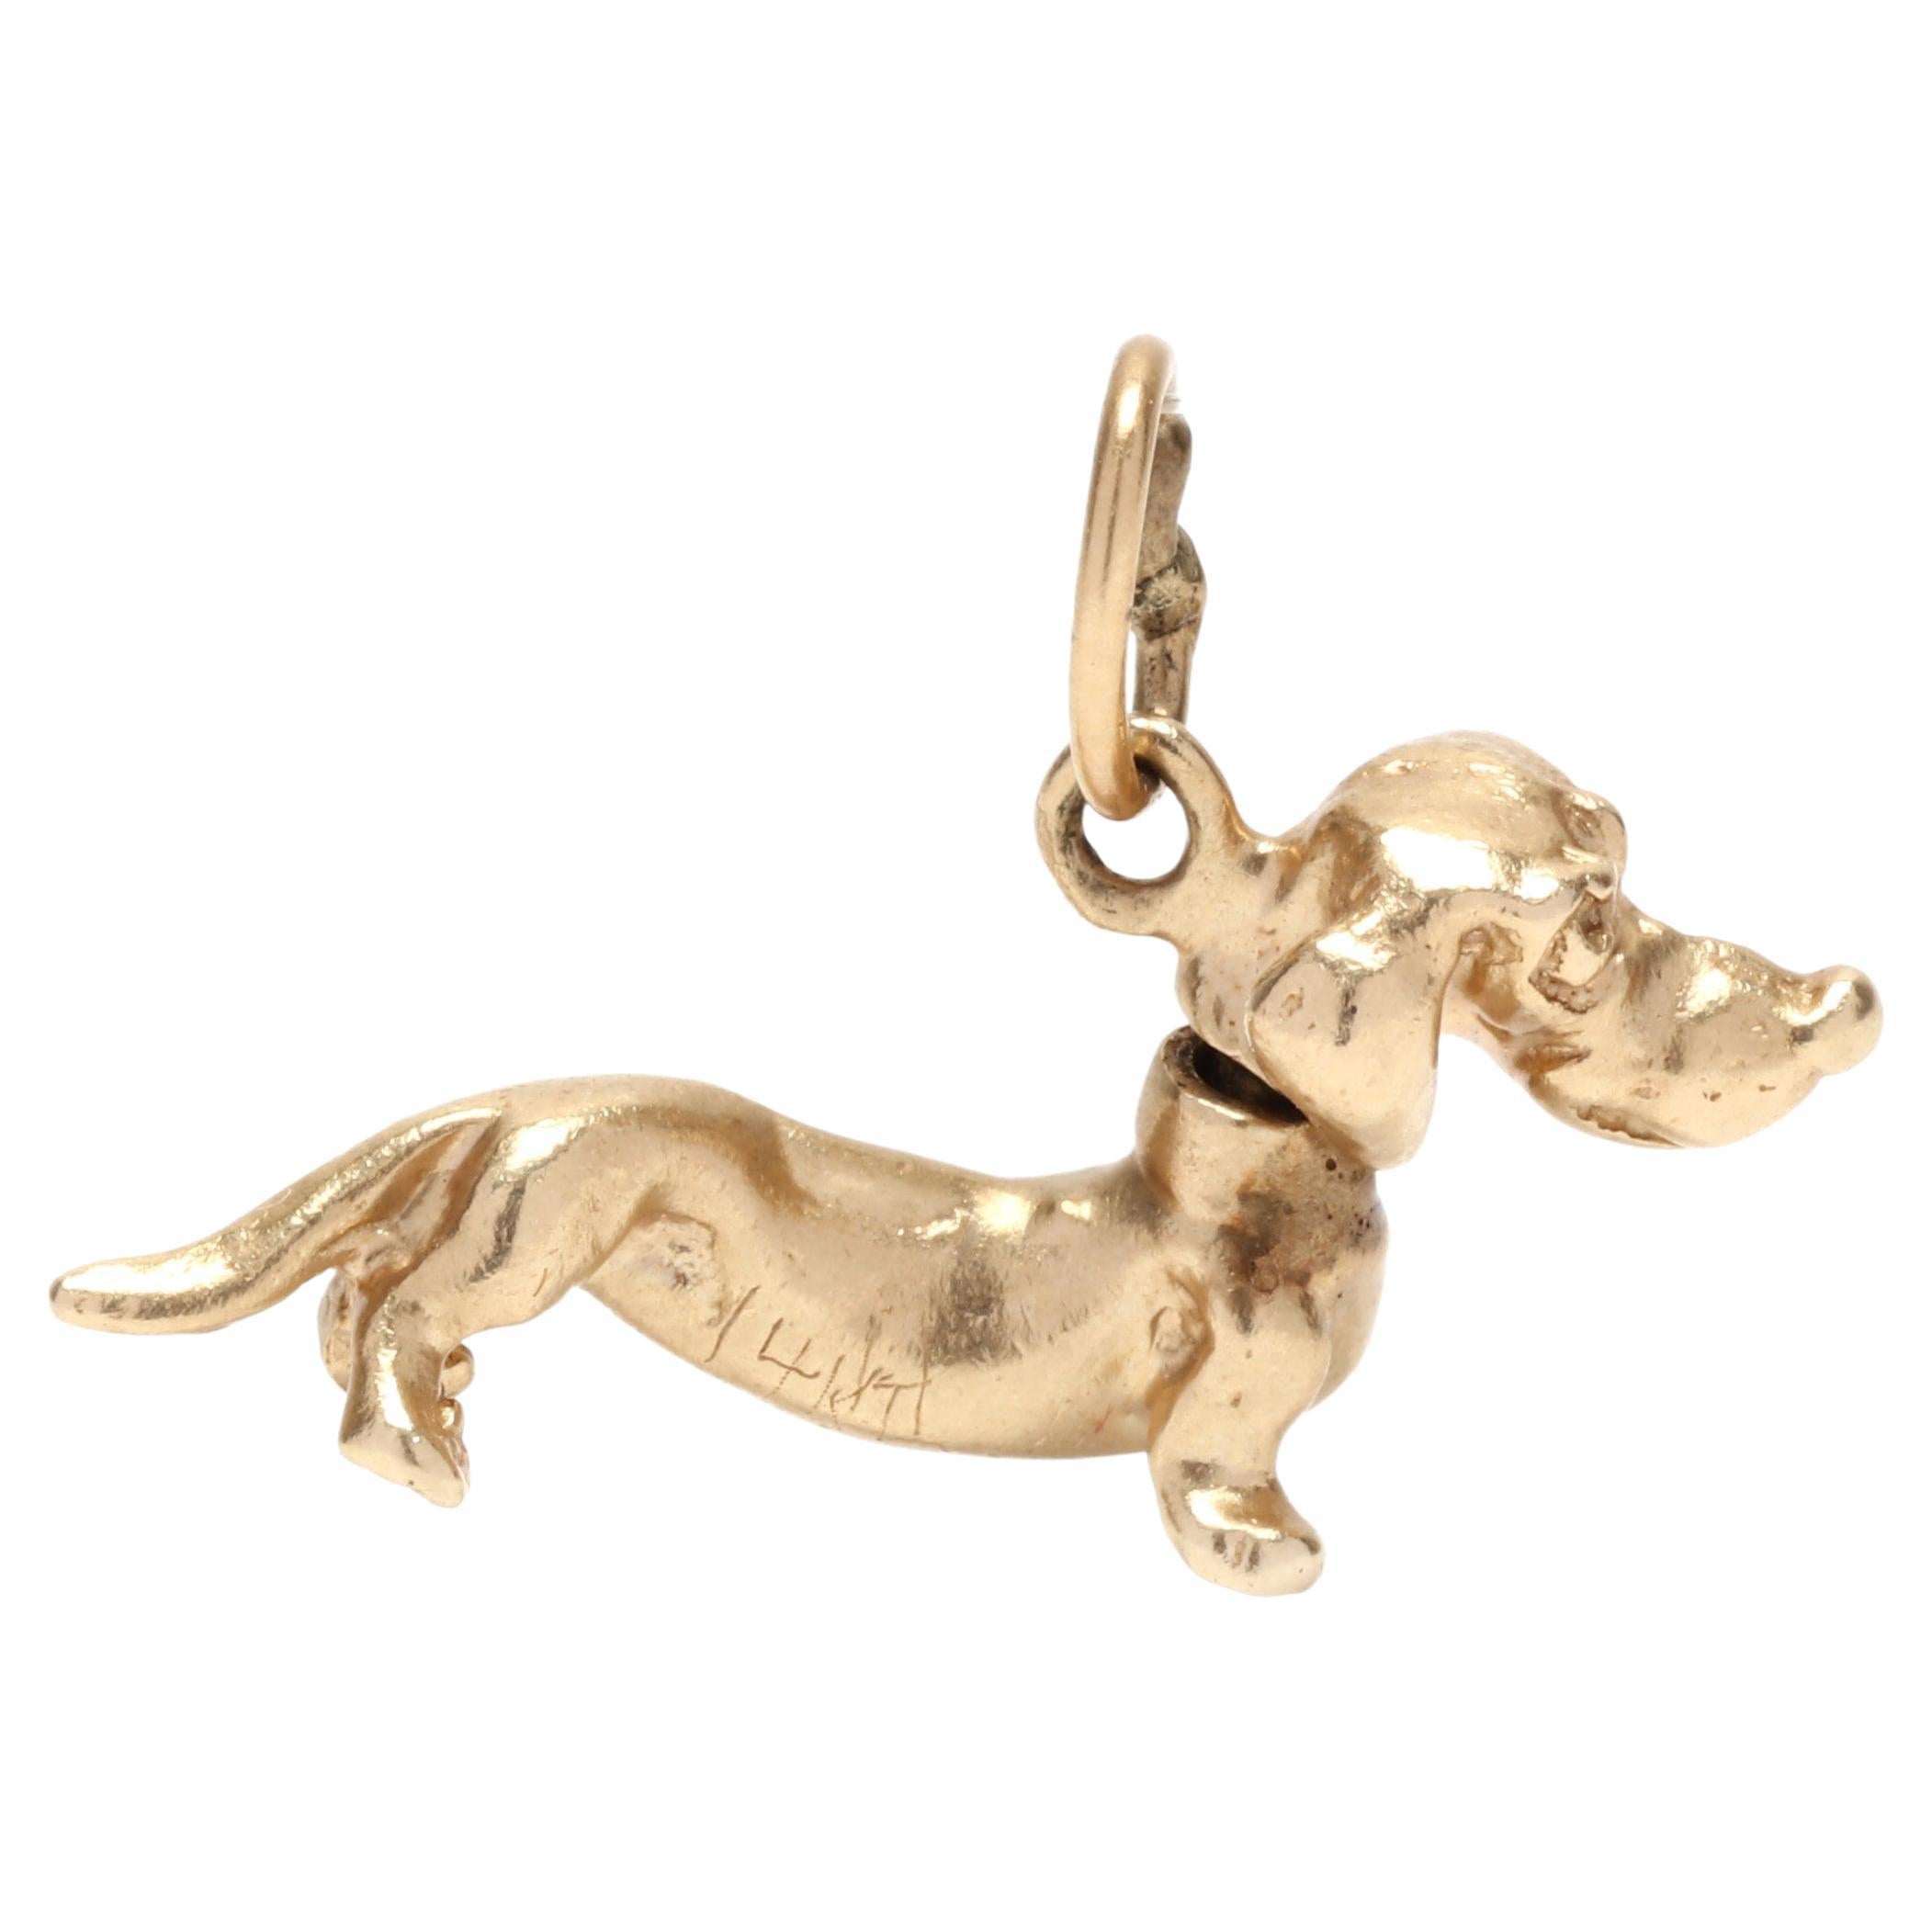 Skyrim Adorable and Lovely Dachshund Dog Crystal Pendant Necklace for Animal Lovers